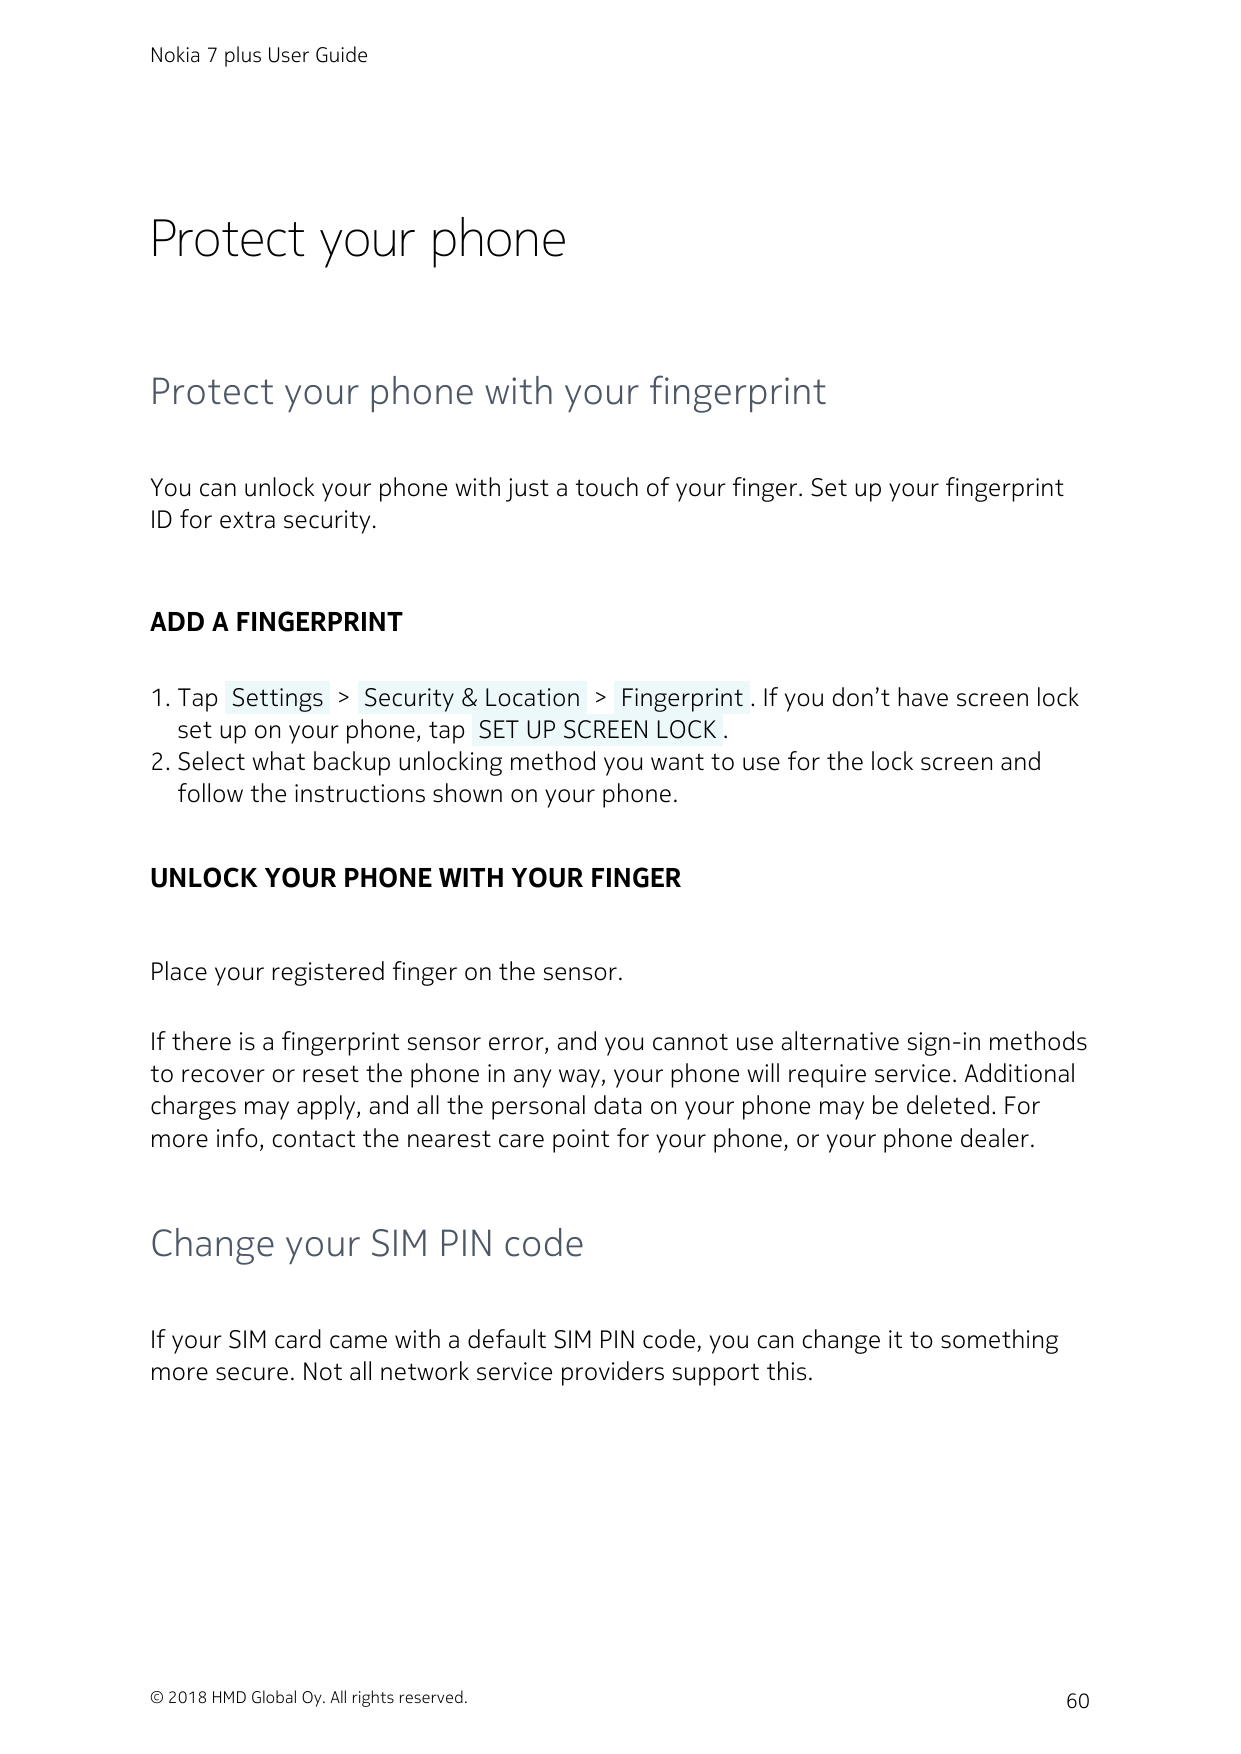 Nokia 7 plus User GuideProtect your phoneProtect your phone with your fingerprintYou can unlock your phone with just a touch of 